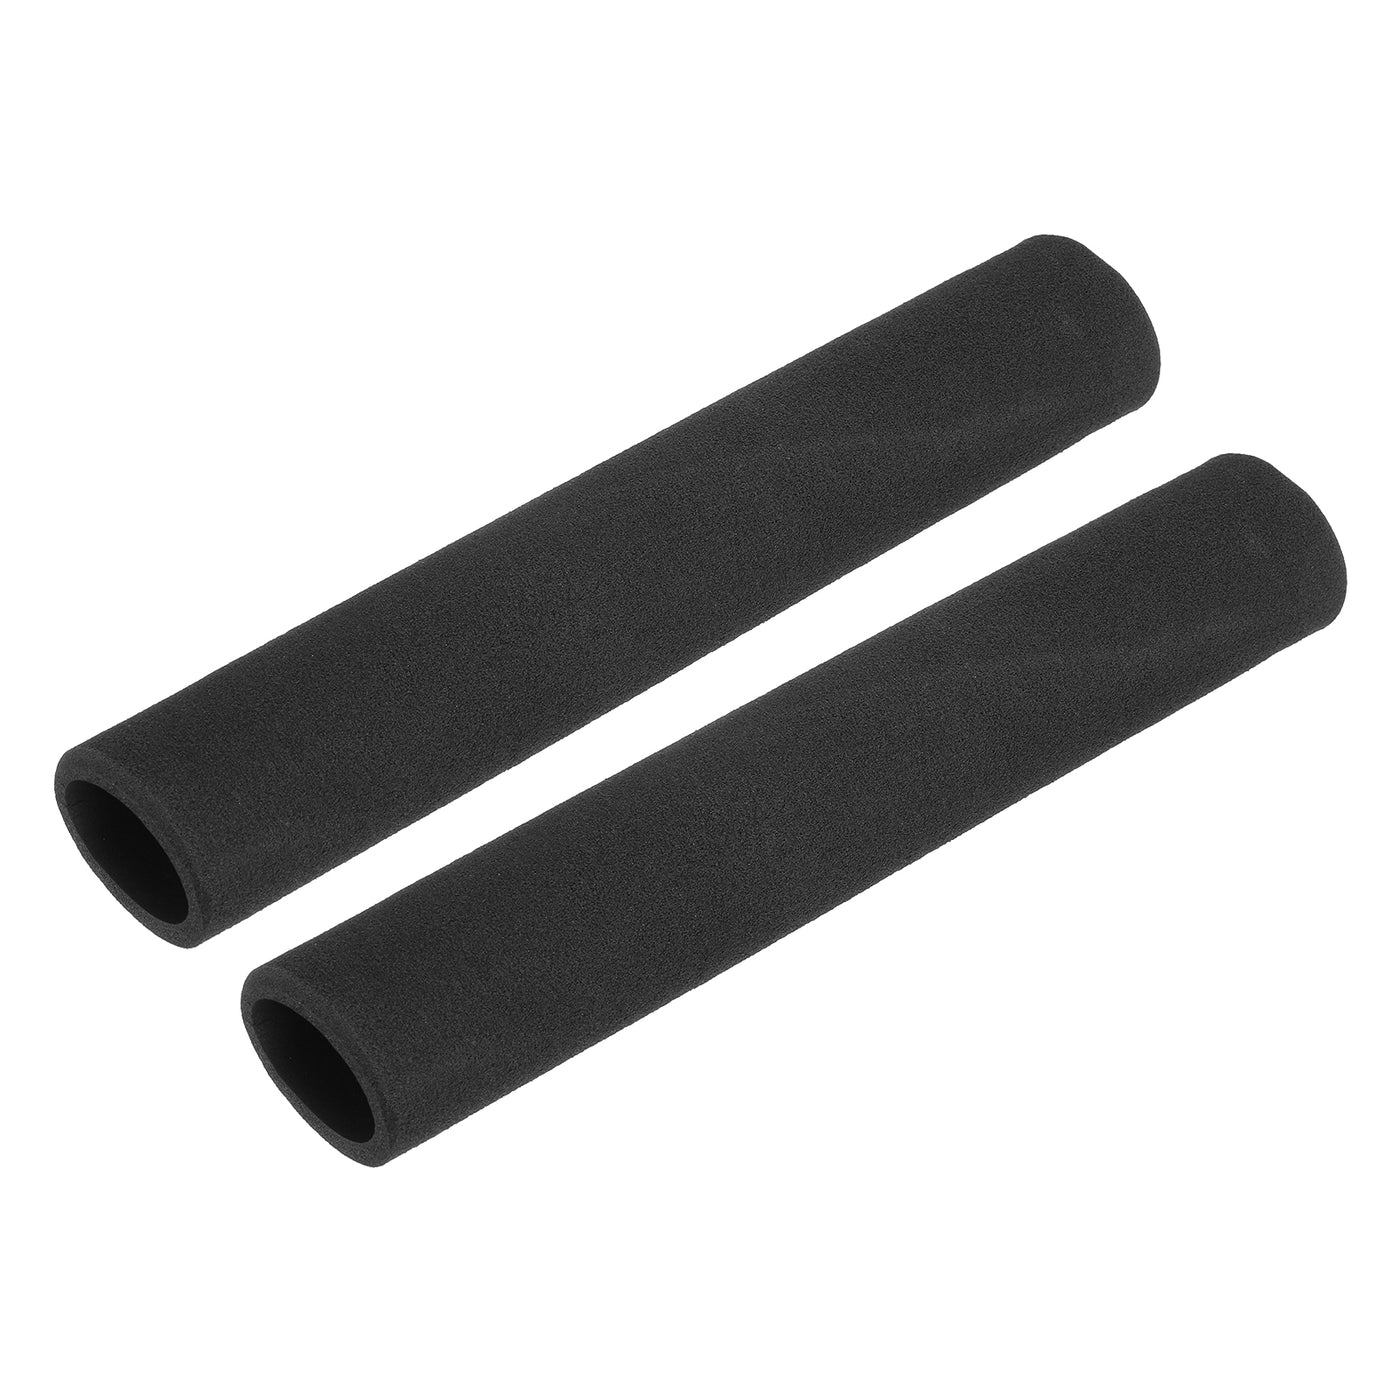 uxcell Uxcell Pipe Insulation Tube Foam Tubing for Handle Grip Support 27mm ID 37mm OD 195mm Heat Preservation Black 2pcs